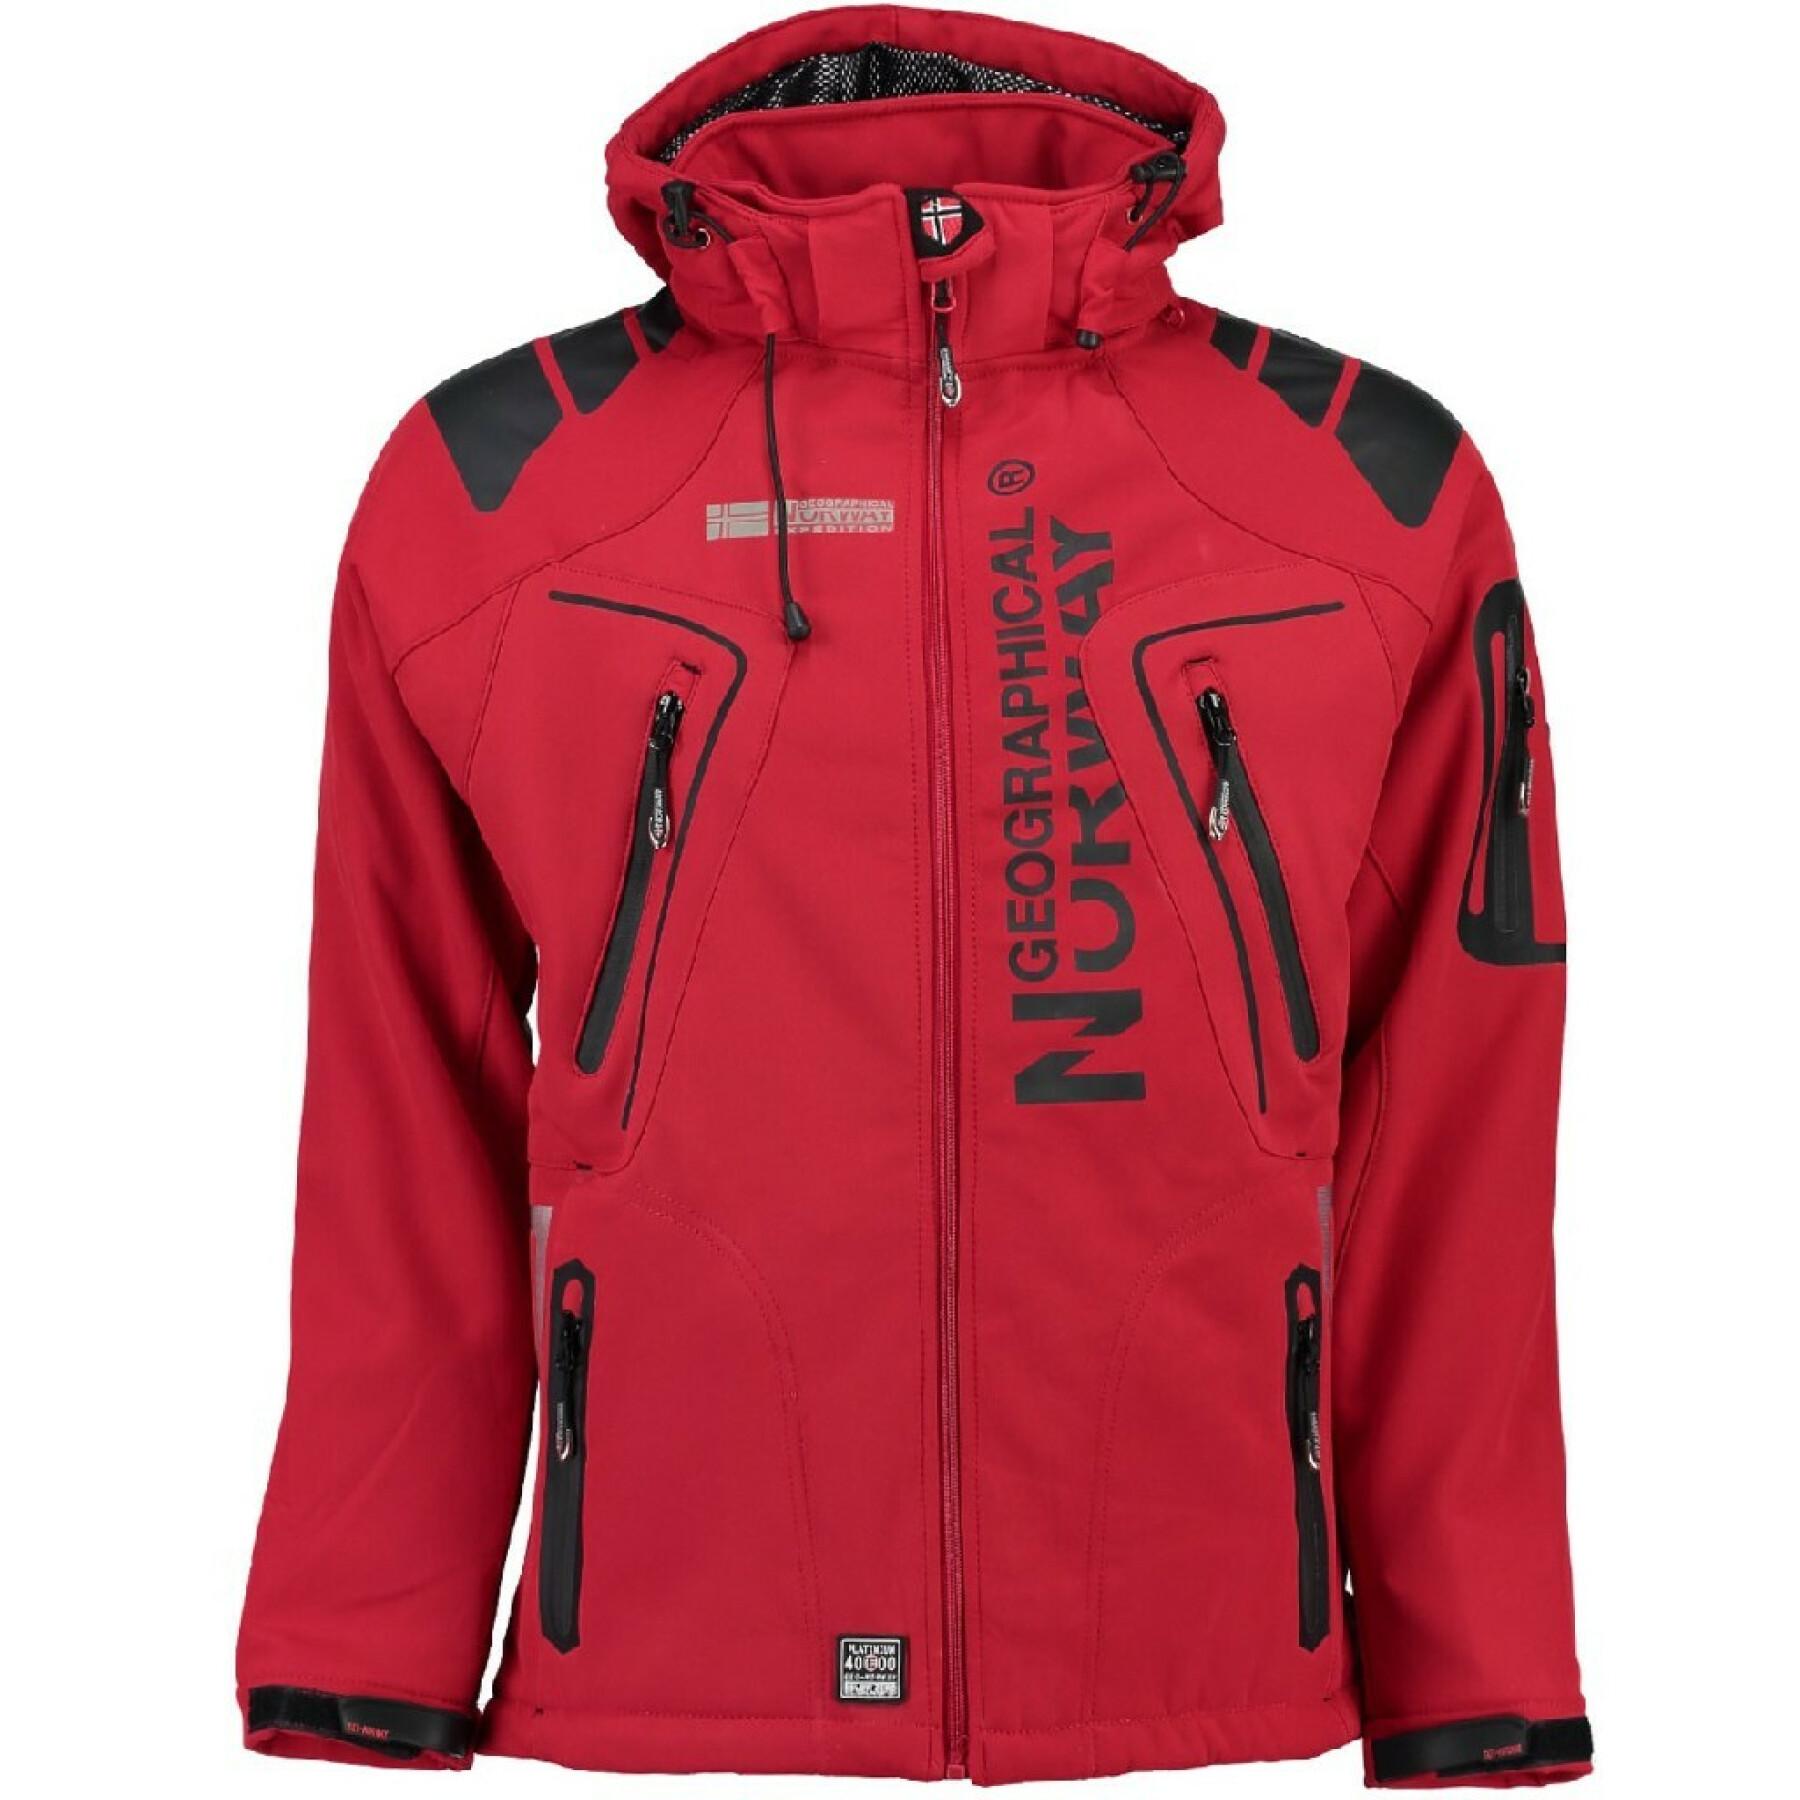 Jacket Geographical Norway Tambour Riv